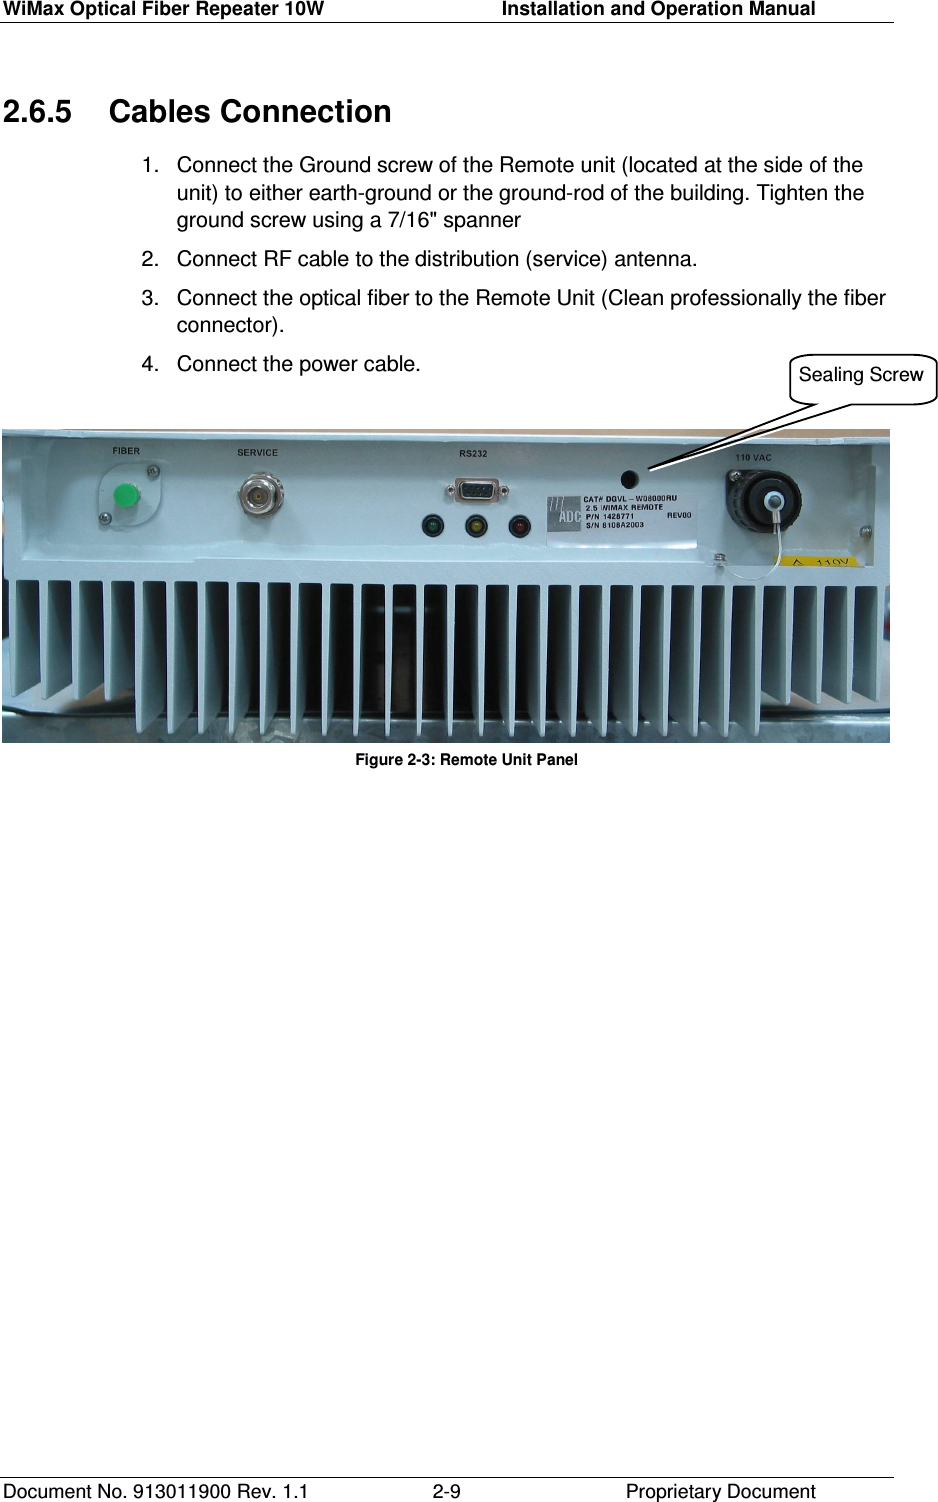 WiMax Optical Fiber Repeater 10W     Installation and Operation Manual Document No. 913011900 Rev. 1.1    Proprietary Document  2-92.6.5  Cables Connection 1.  Connect the Ground screw of the Remote unit (located at the side of the unit) to either earth-ground or the ground-rod of the building. Tighten the ground screw using a 7/16&quot; spanner  2.  Connect RF cable to the distribution (service) antenna. 3.  Connect the optical fiber to the Remote Unit (Clean professionally the fiber connector).  4.  Connect the power cable.   Figure 2-3: Remote Unit Panel  Sealing Screw 